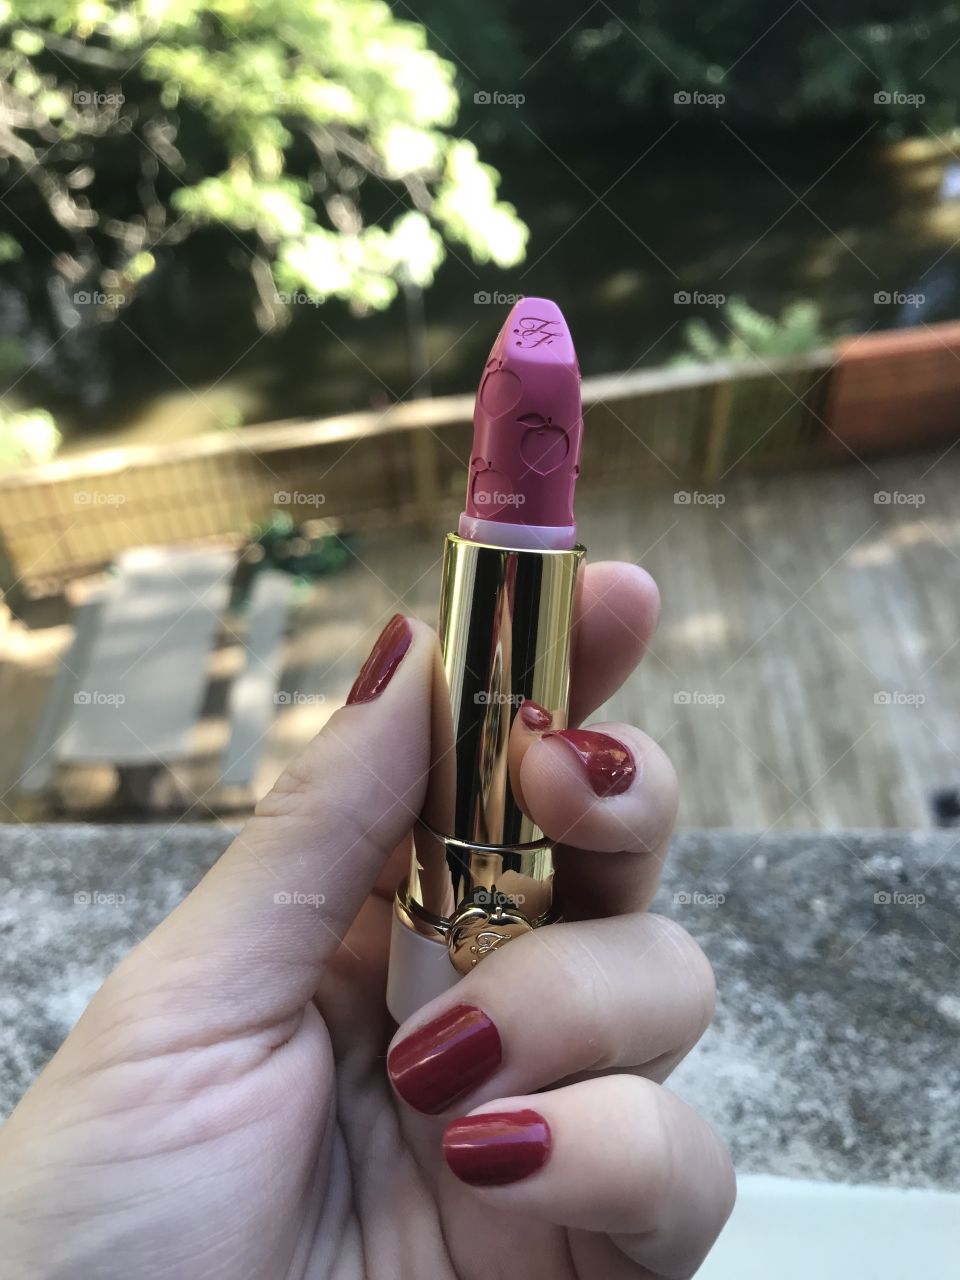 Too Faced lipstick 